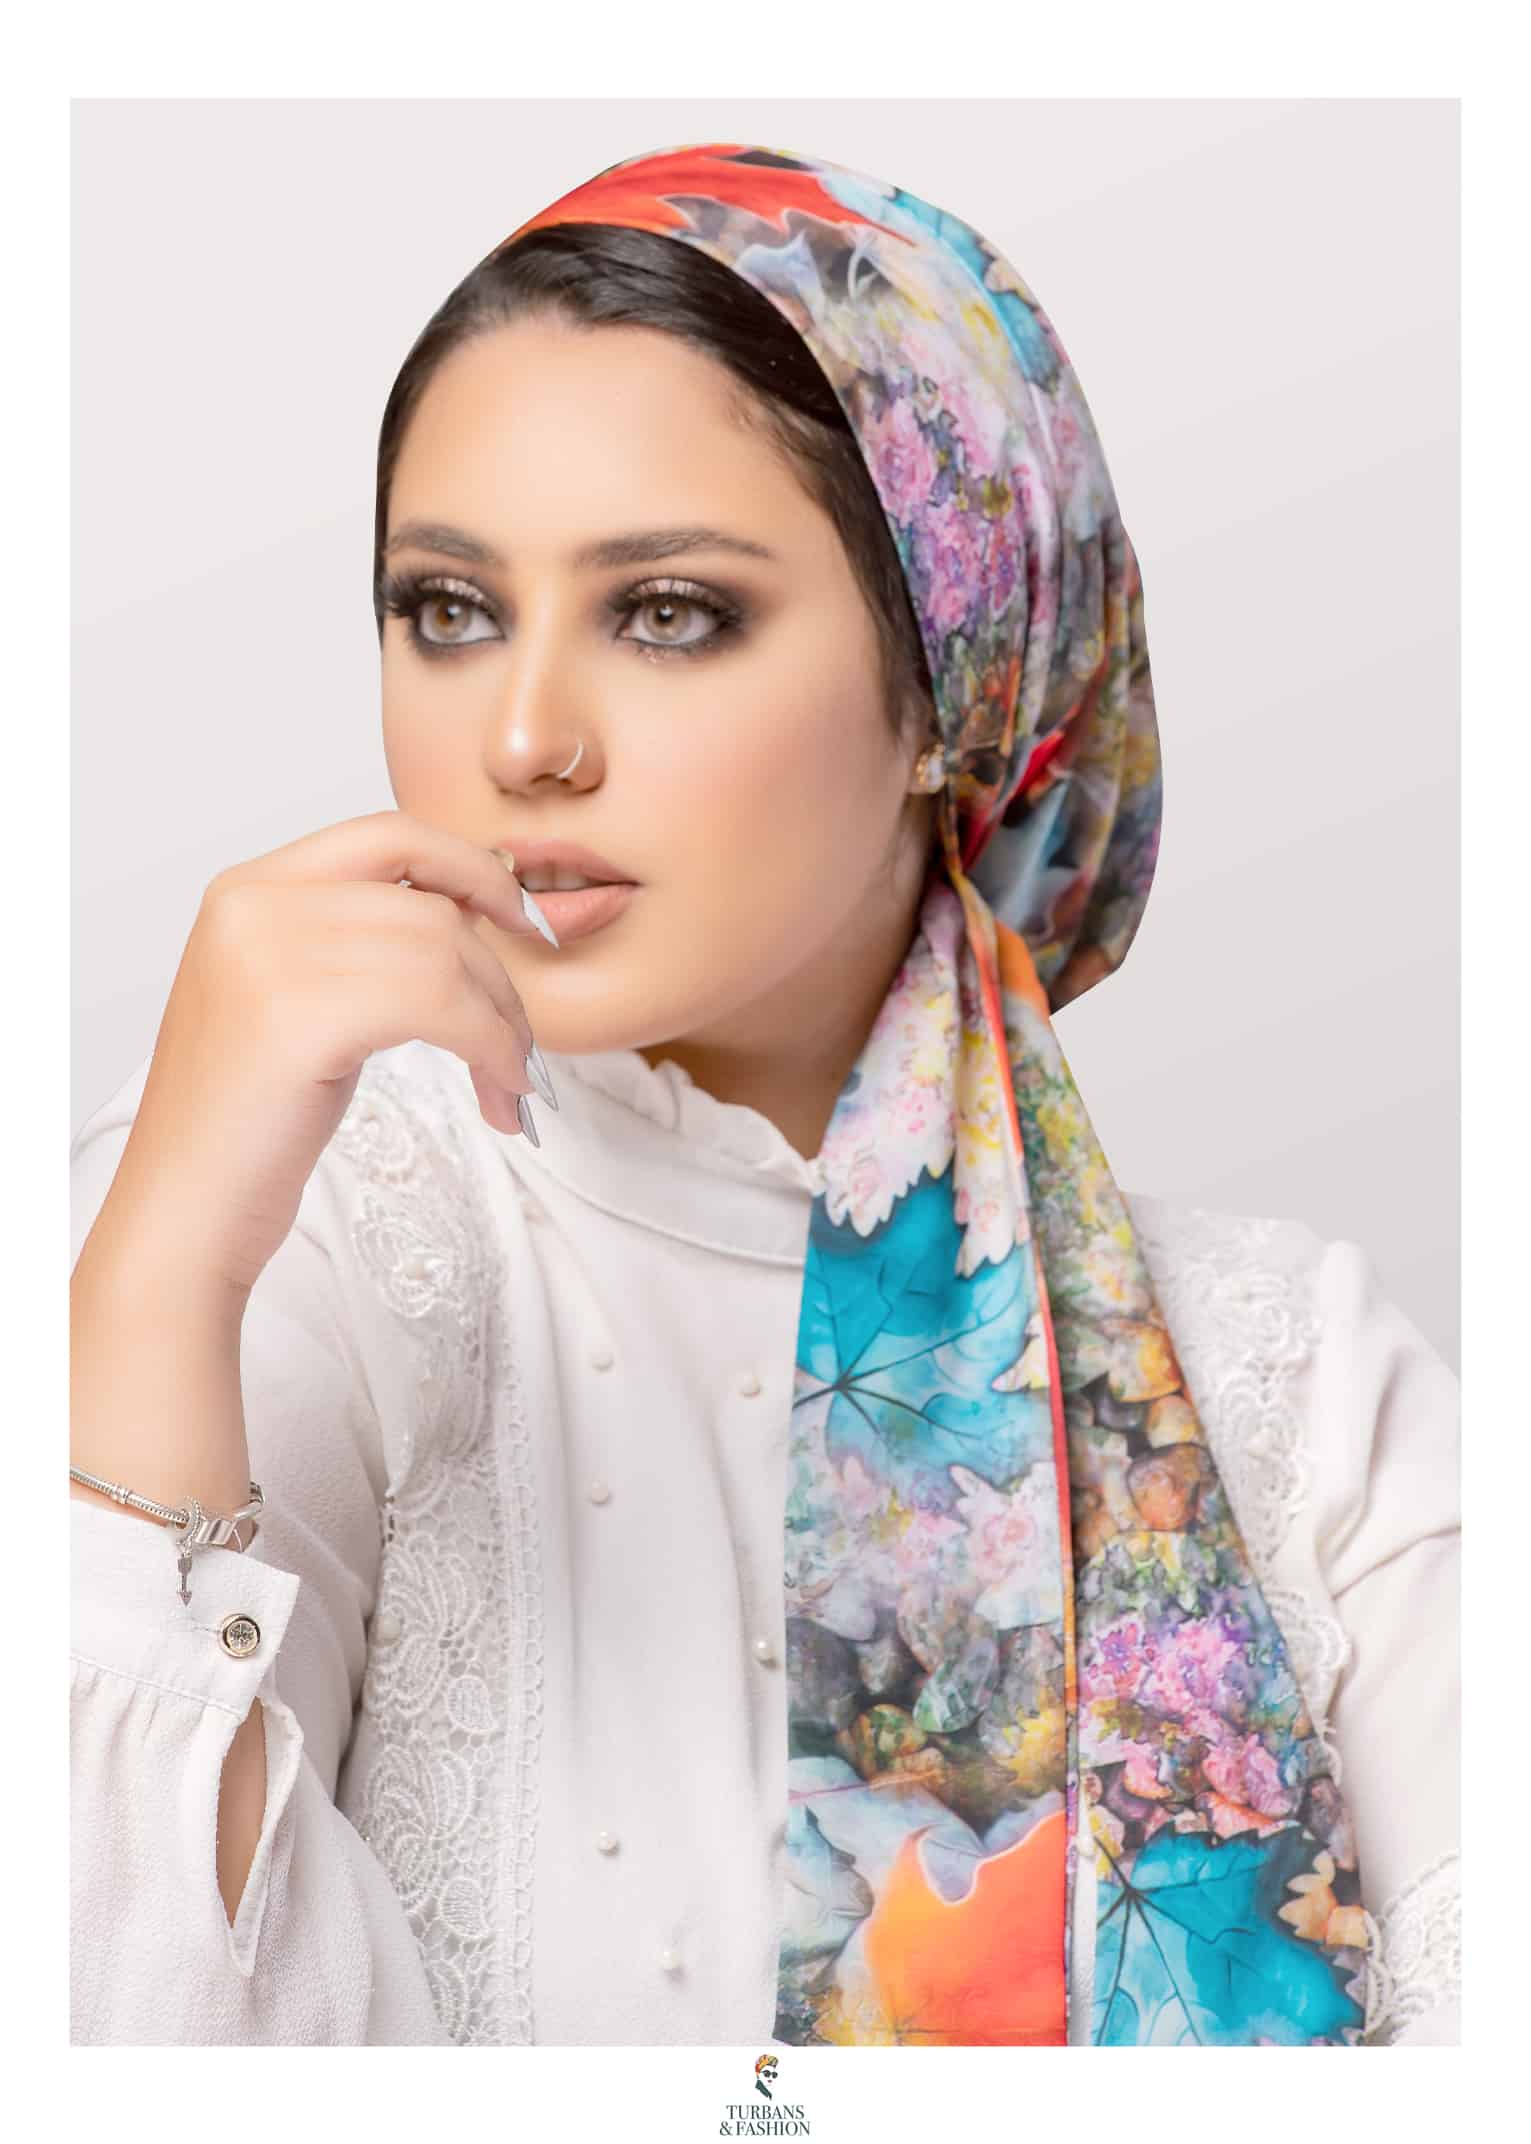 Stylish and Colorful Versatile 2-Way Soft Tie One-Piece Multi-Color Turban in Soft Fabric